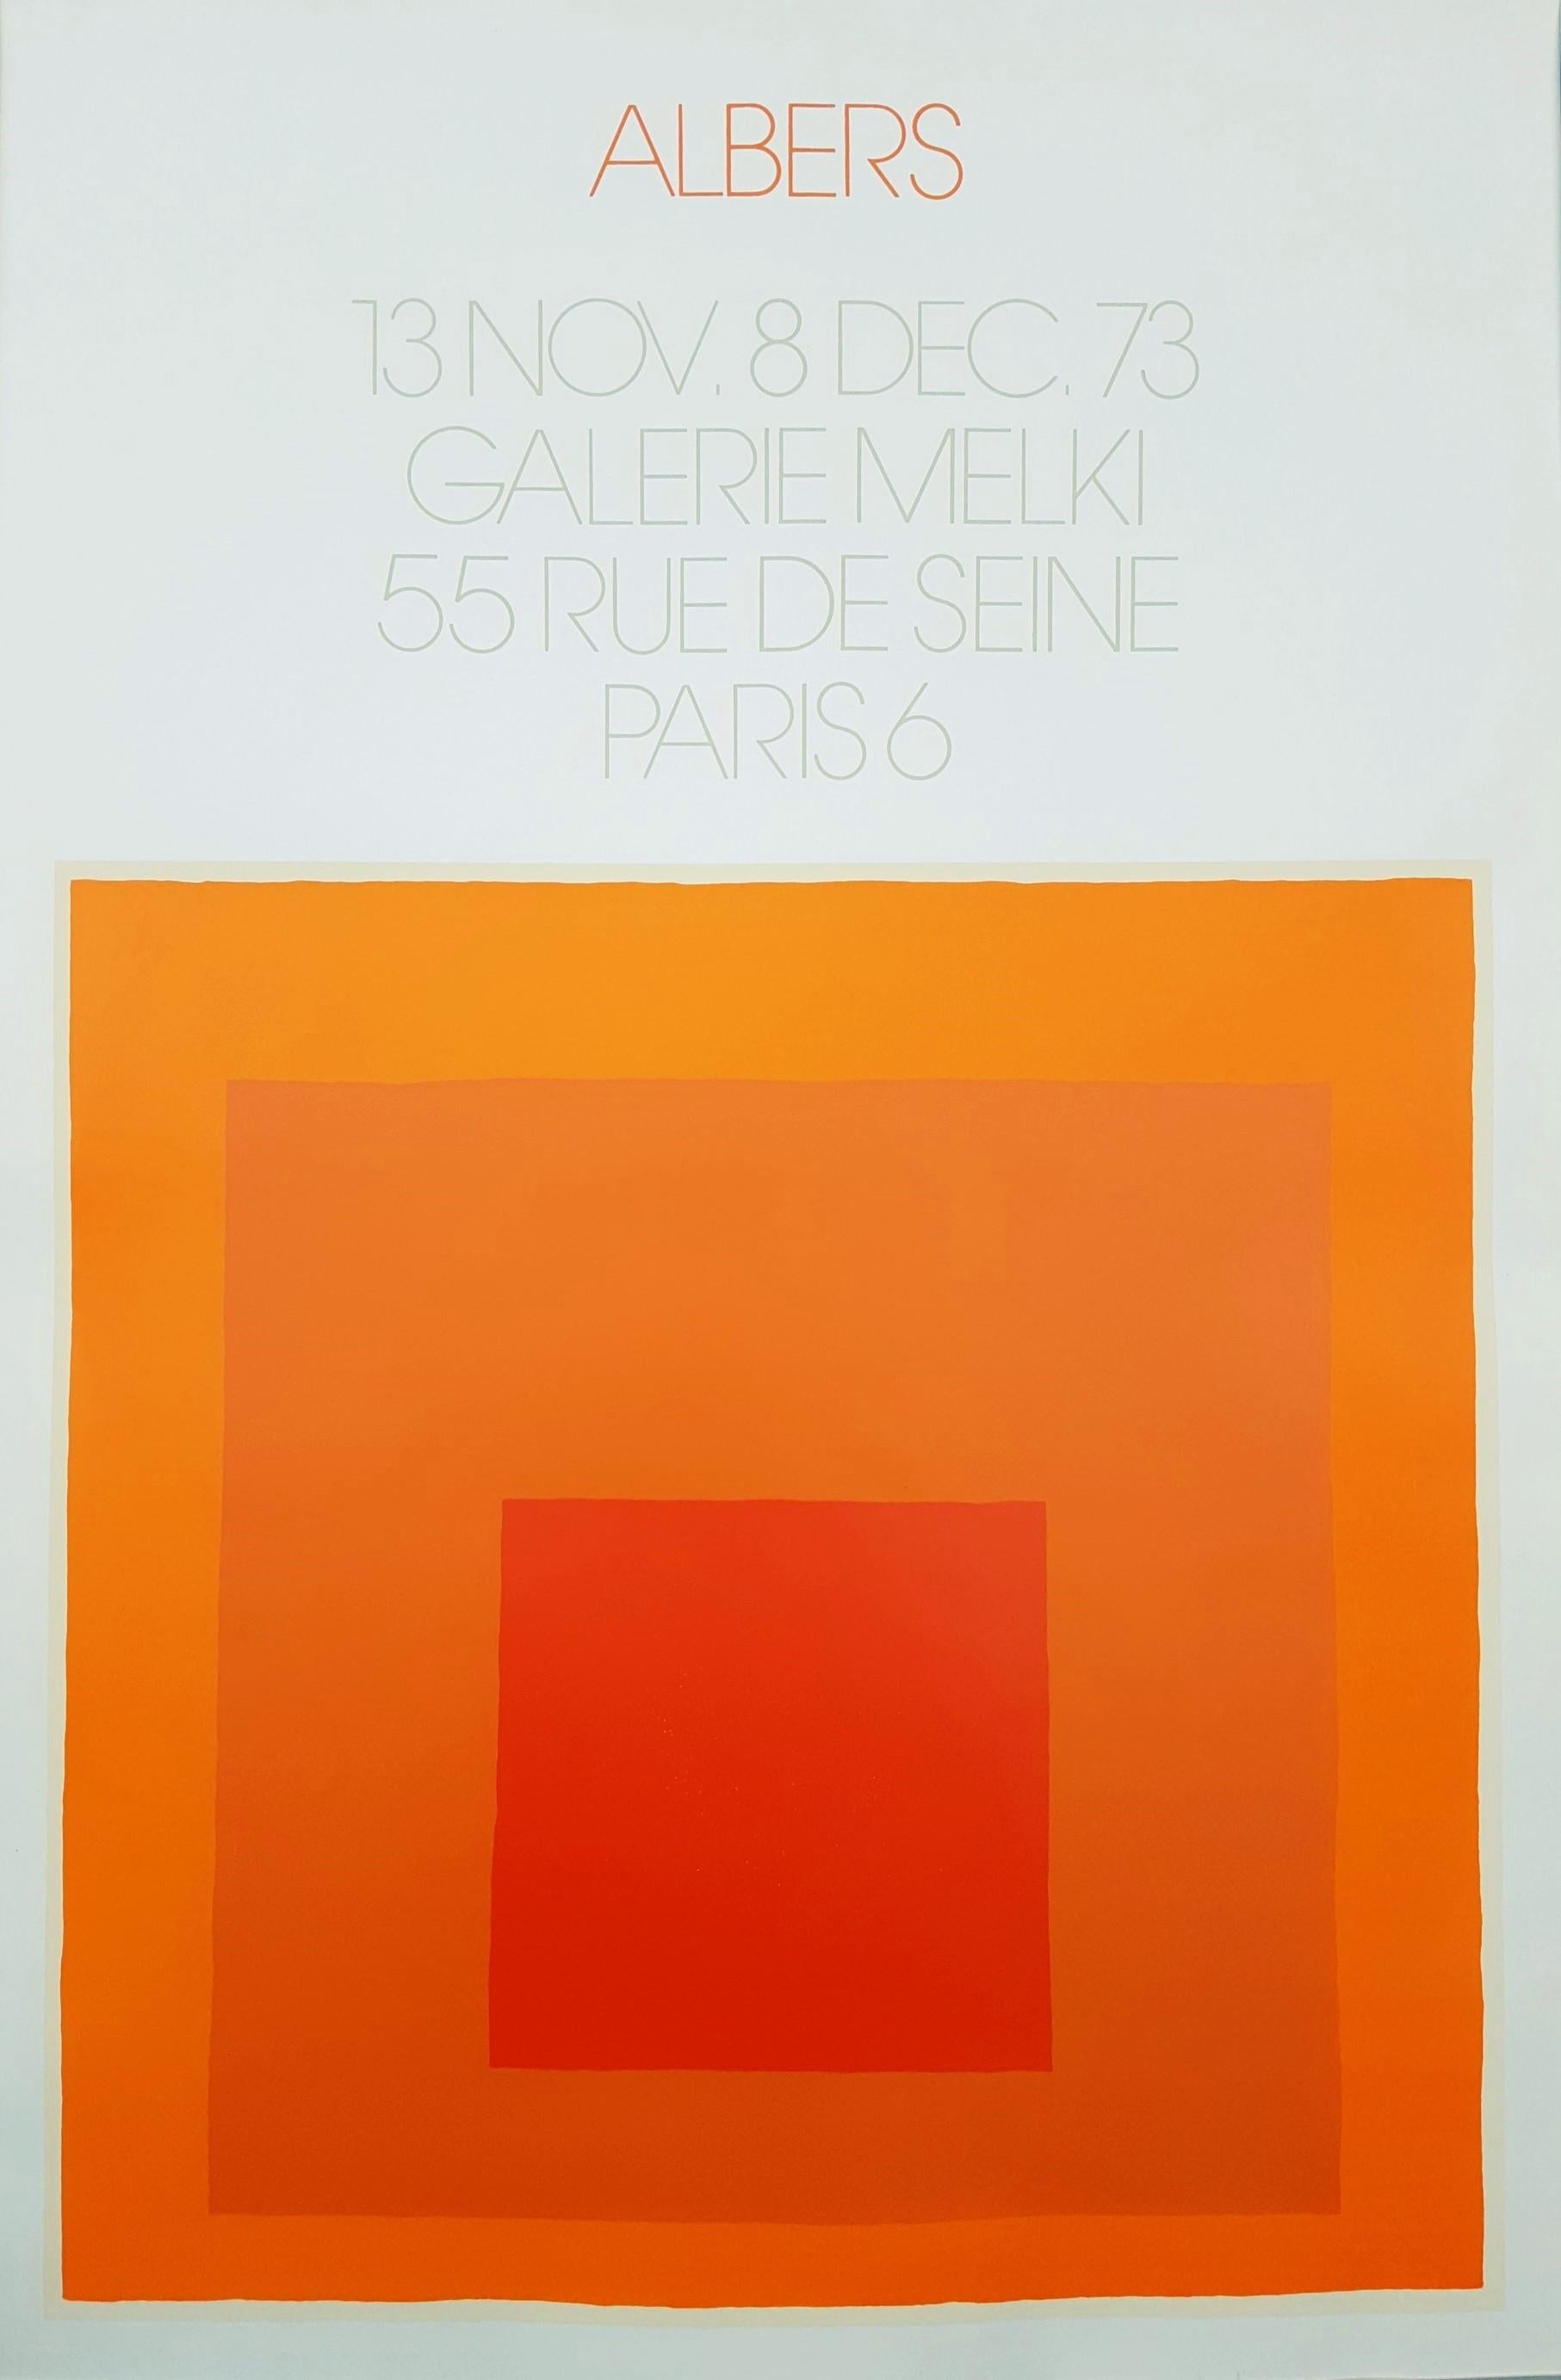 Josef Albers Abstract Print - Galerie Melki (Homage to the Square)